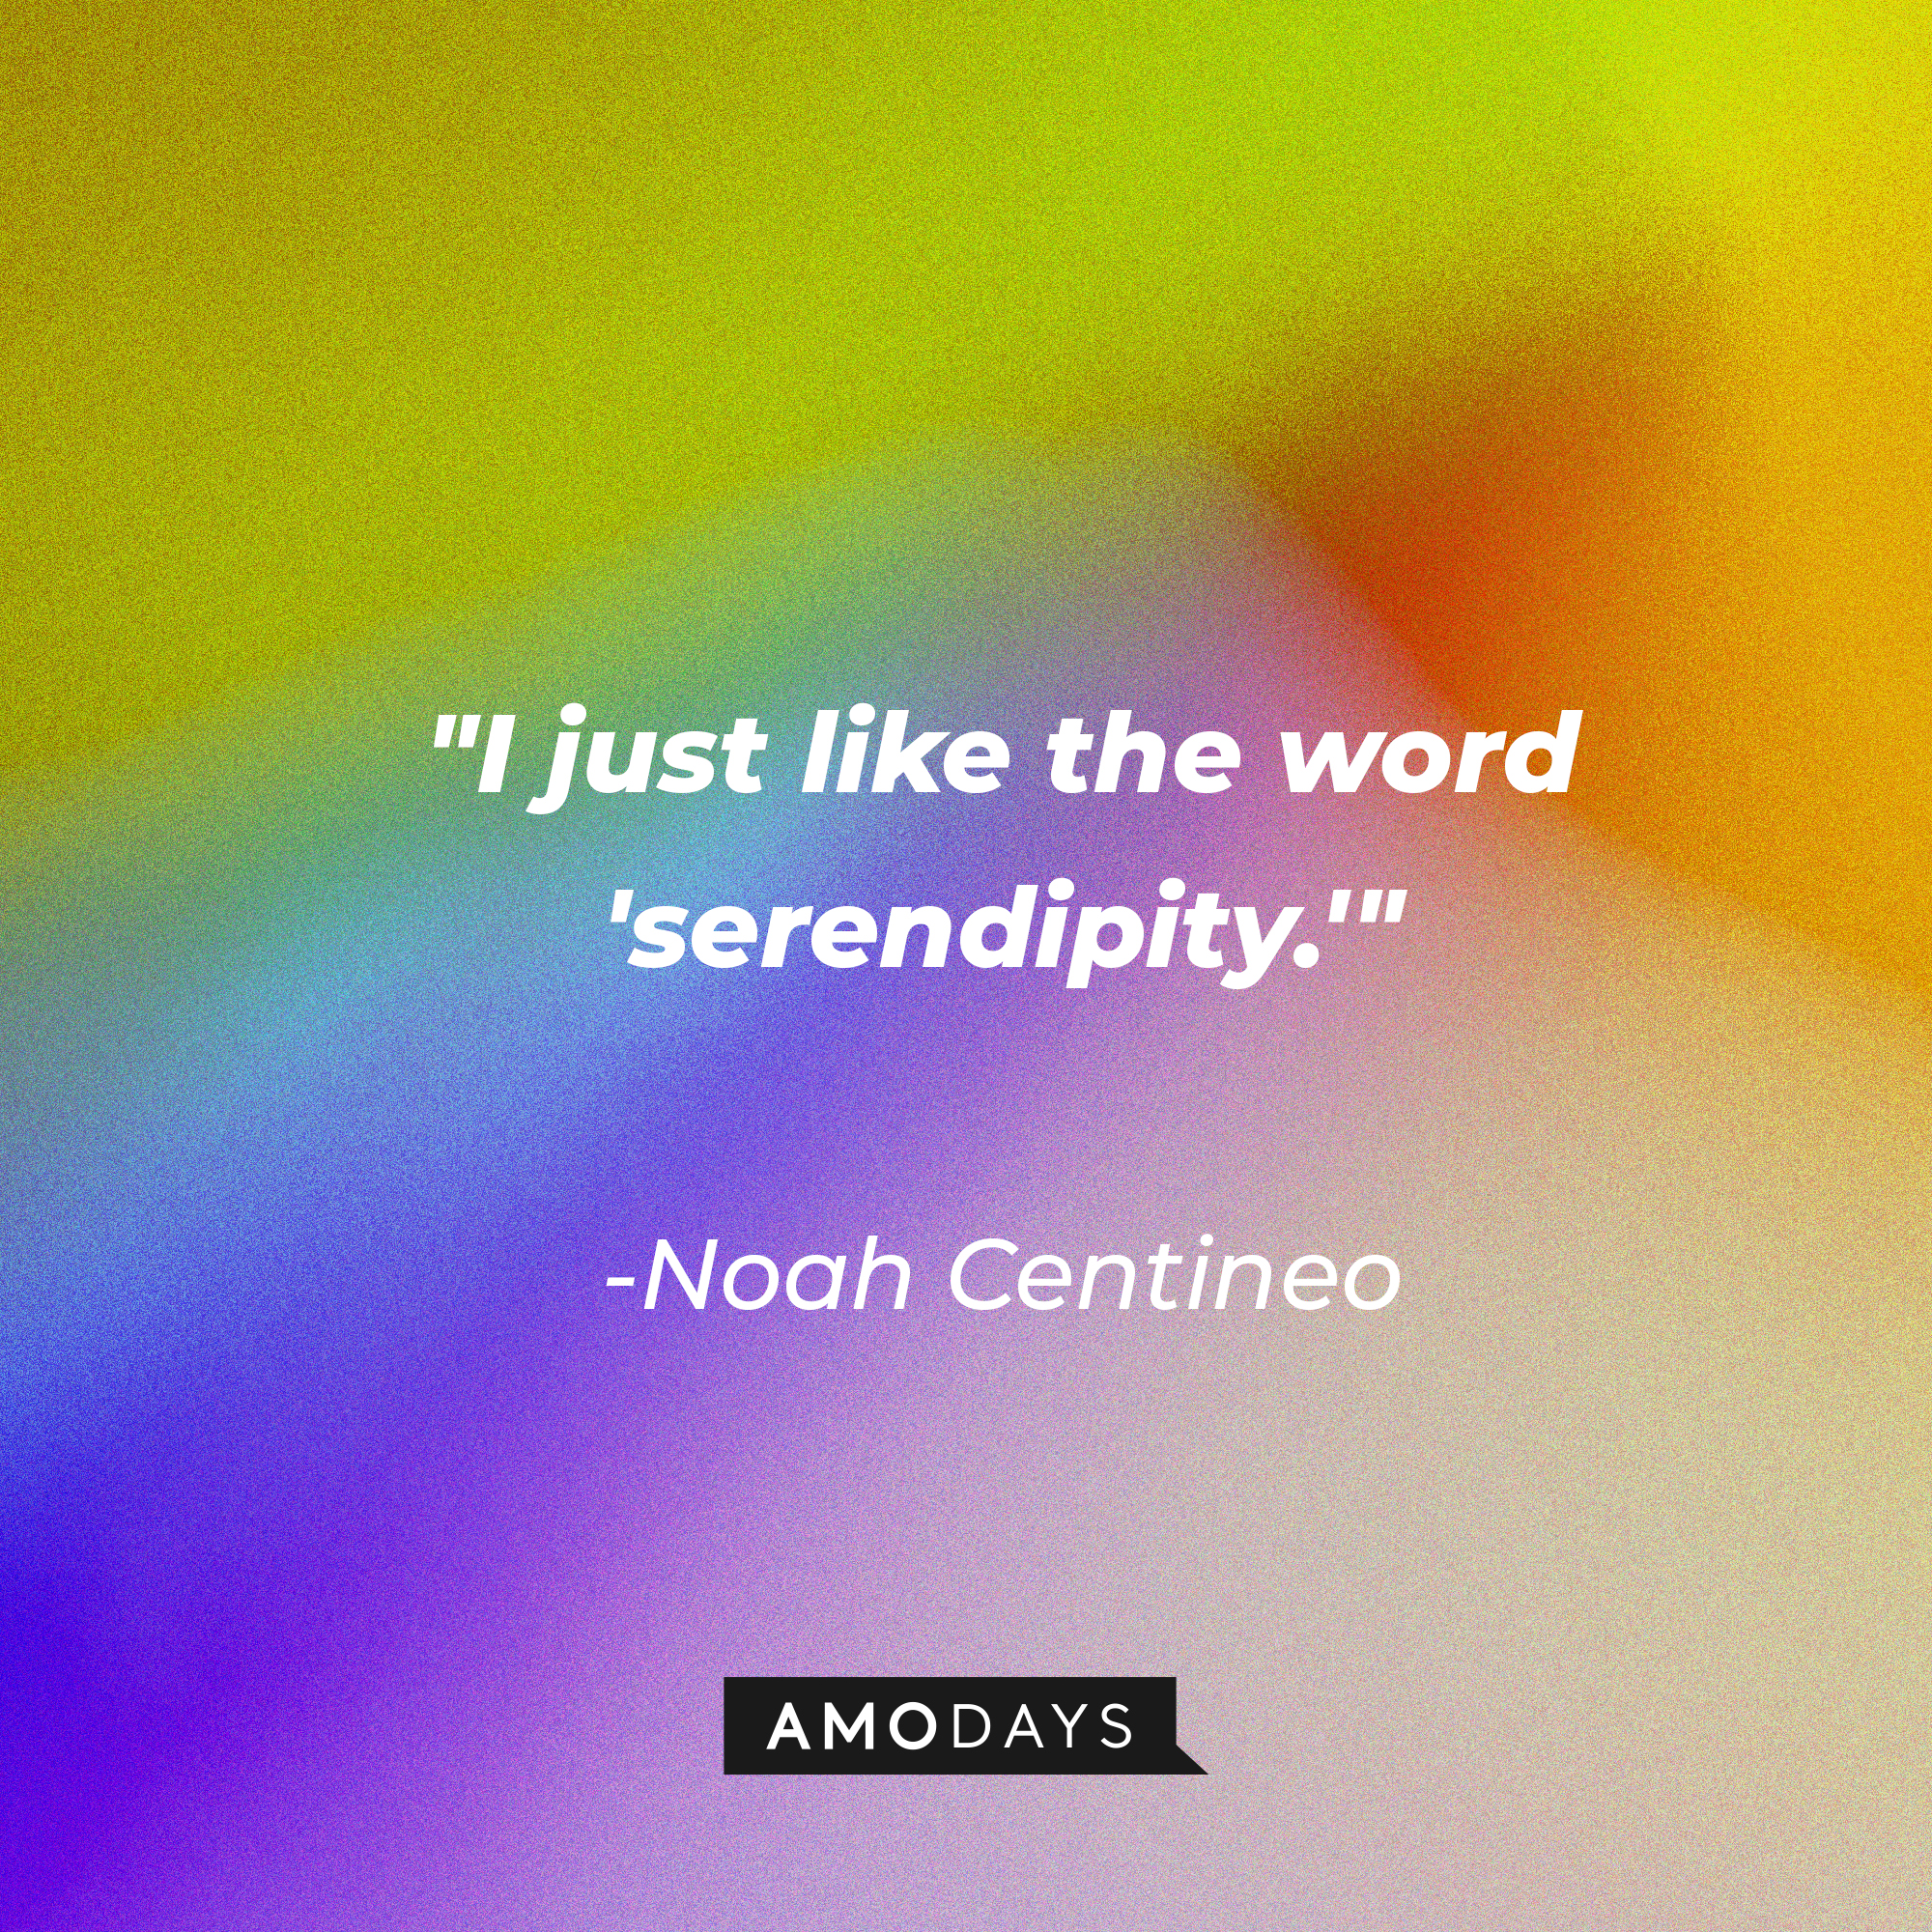 Noah Centineo's quote: "I just like the word 'serendipity.'" | Image: AmoDays